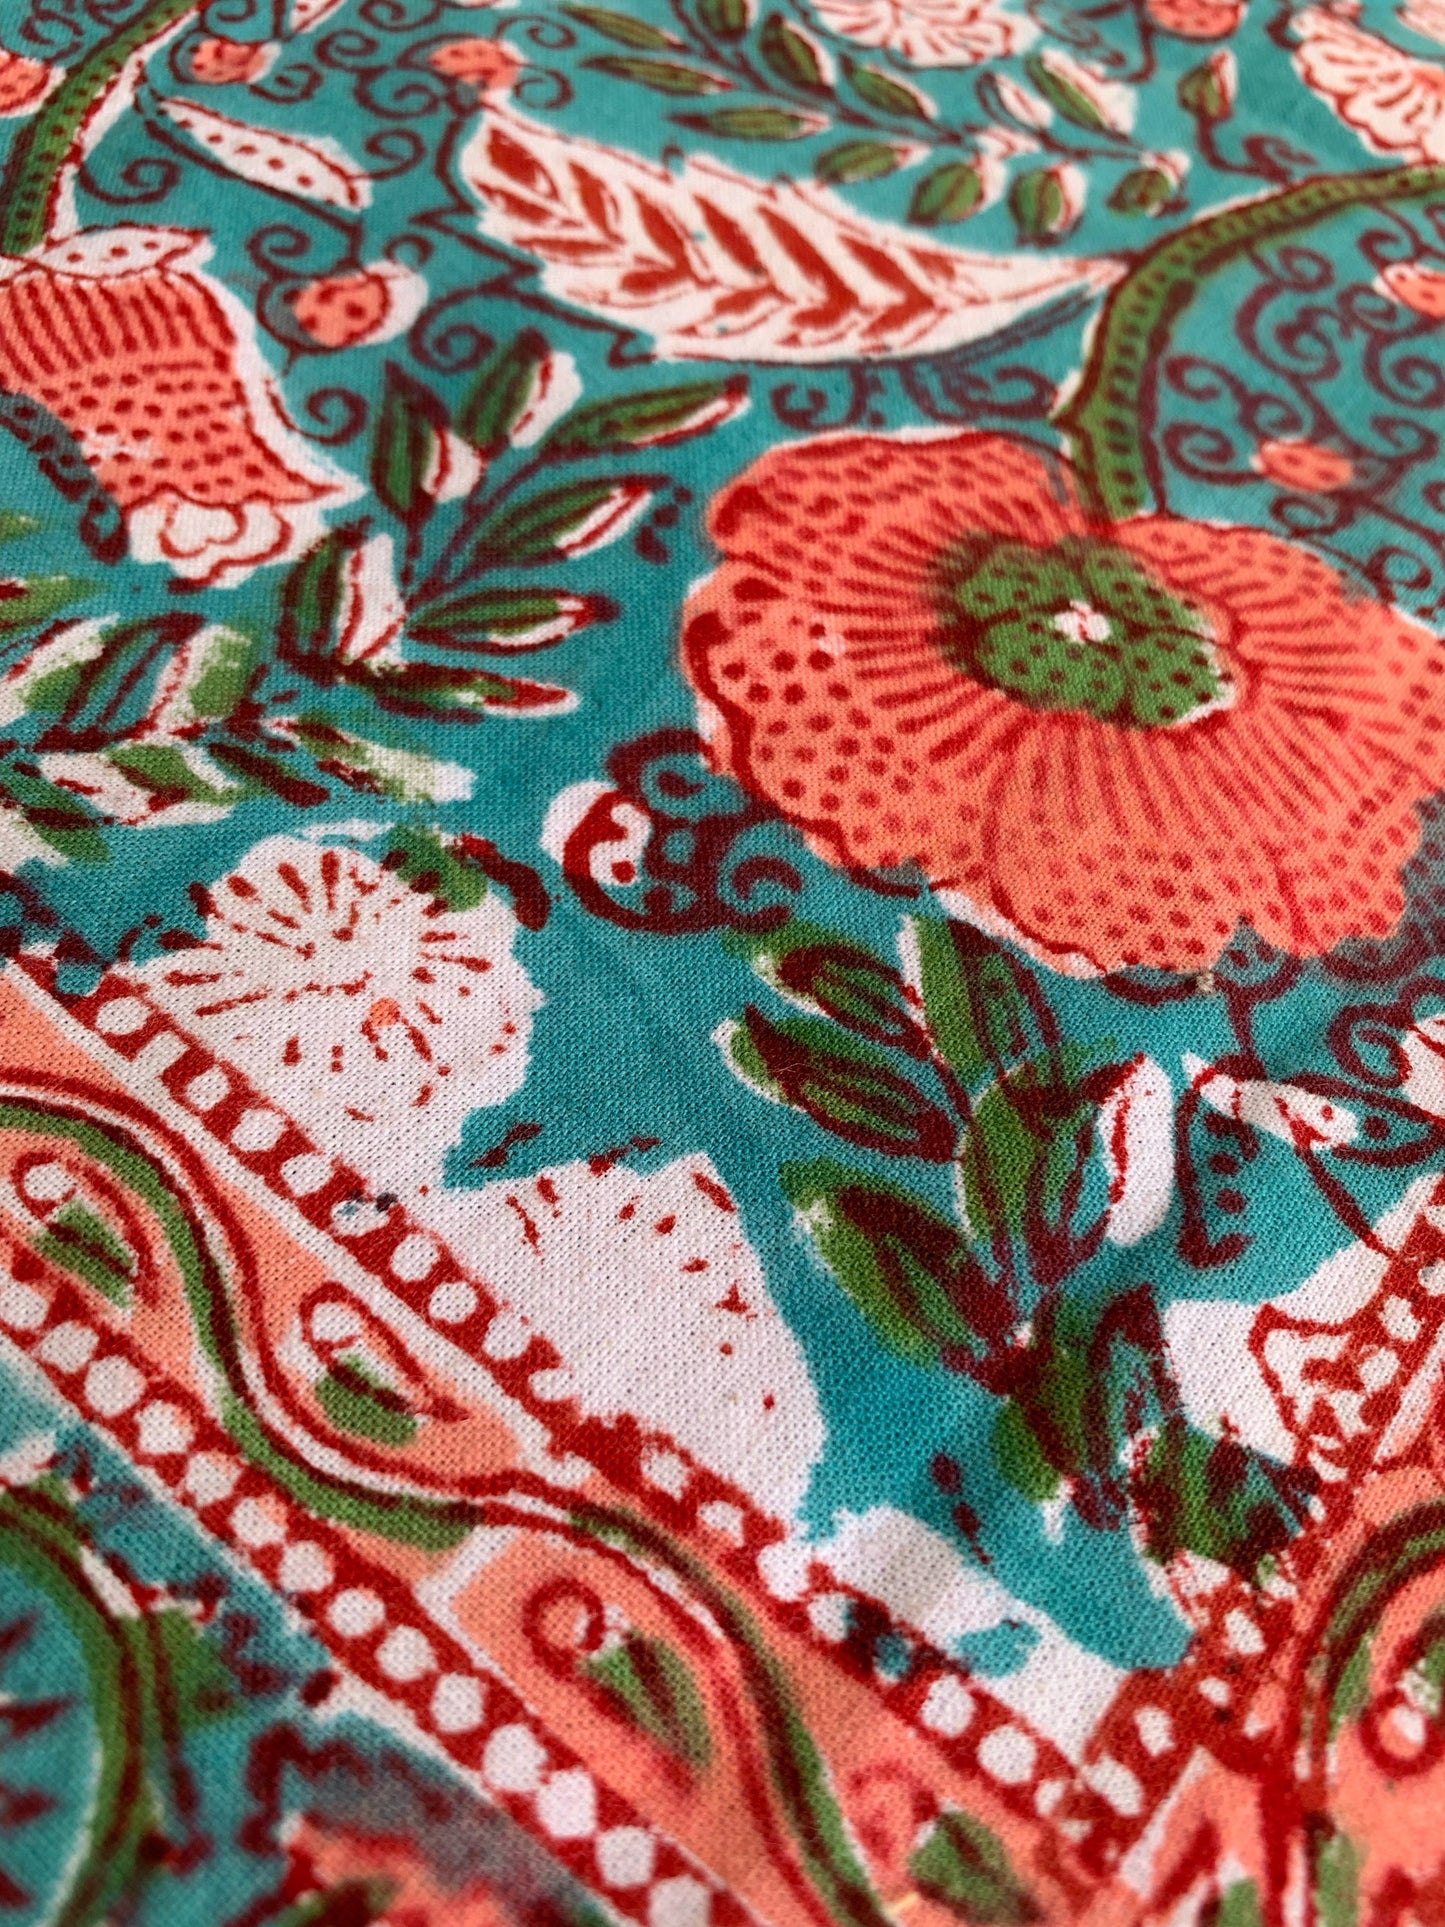 Pure cotton block print tablecloth handmade in India · Square 4 diners · Boho chic tablecloth 100% Indian cotton · Turquoise and coral